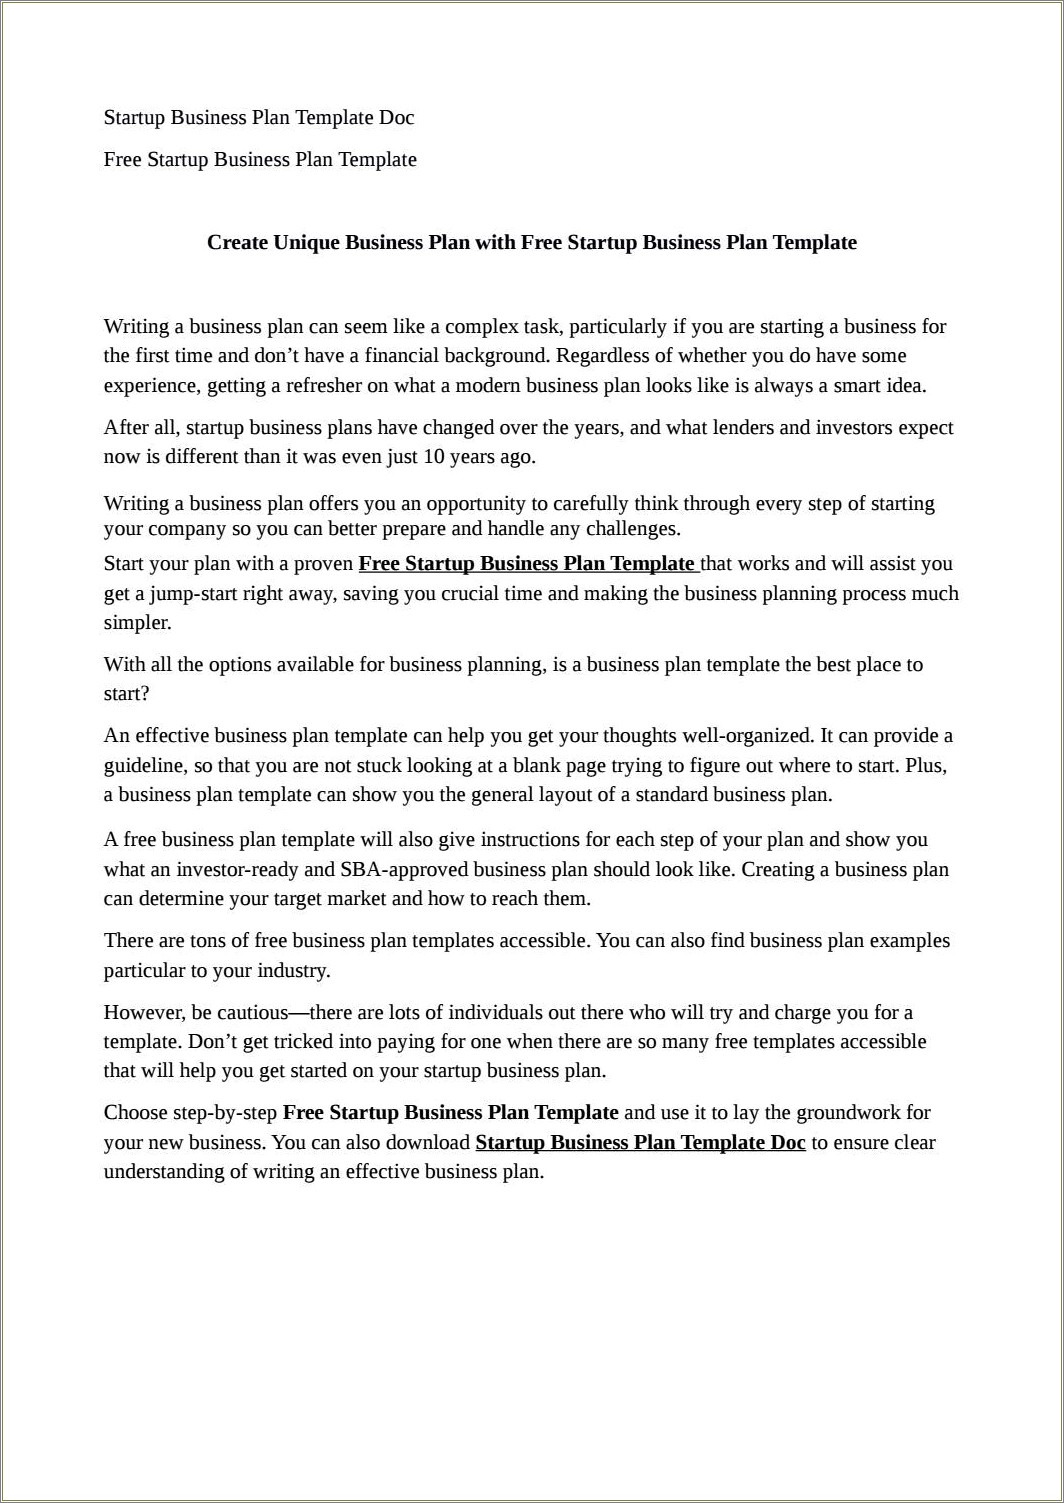 Business Plan Template Free One Page